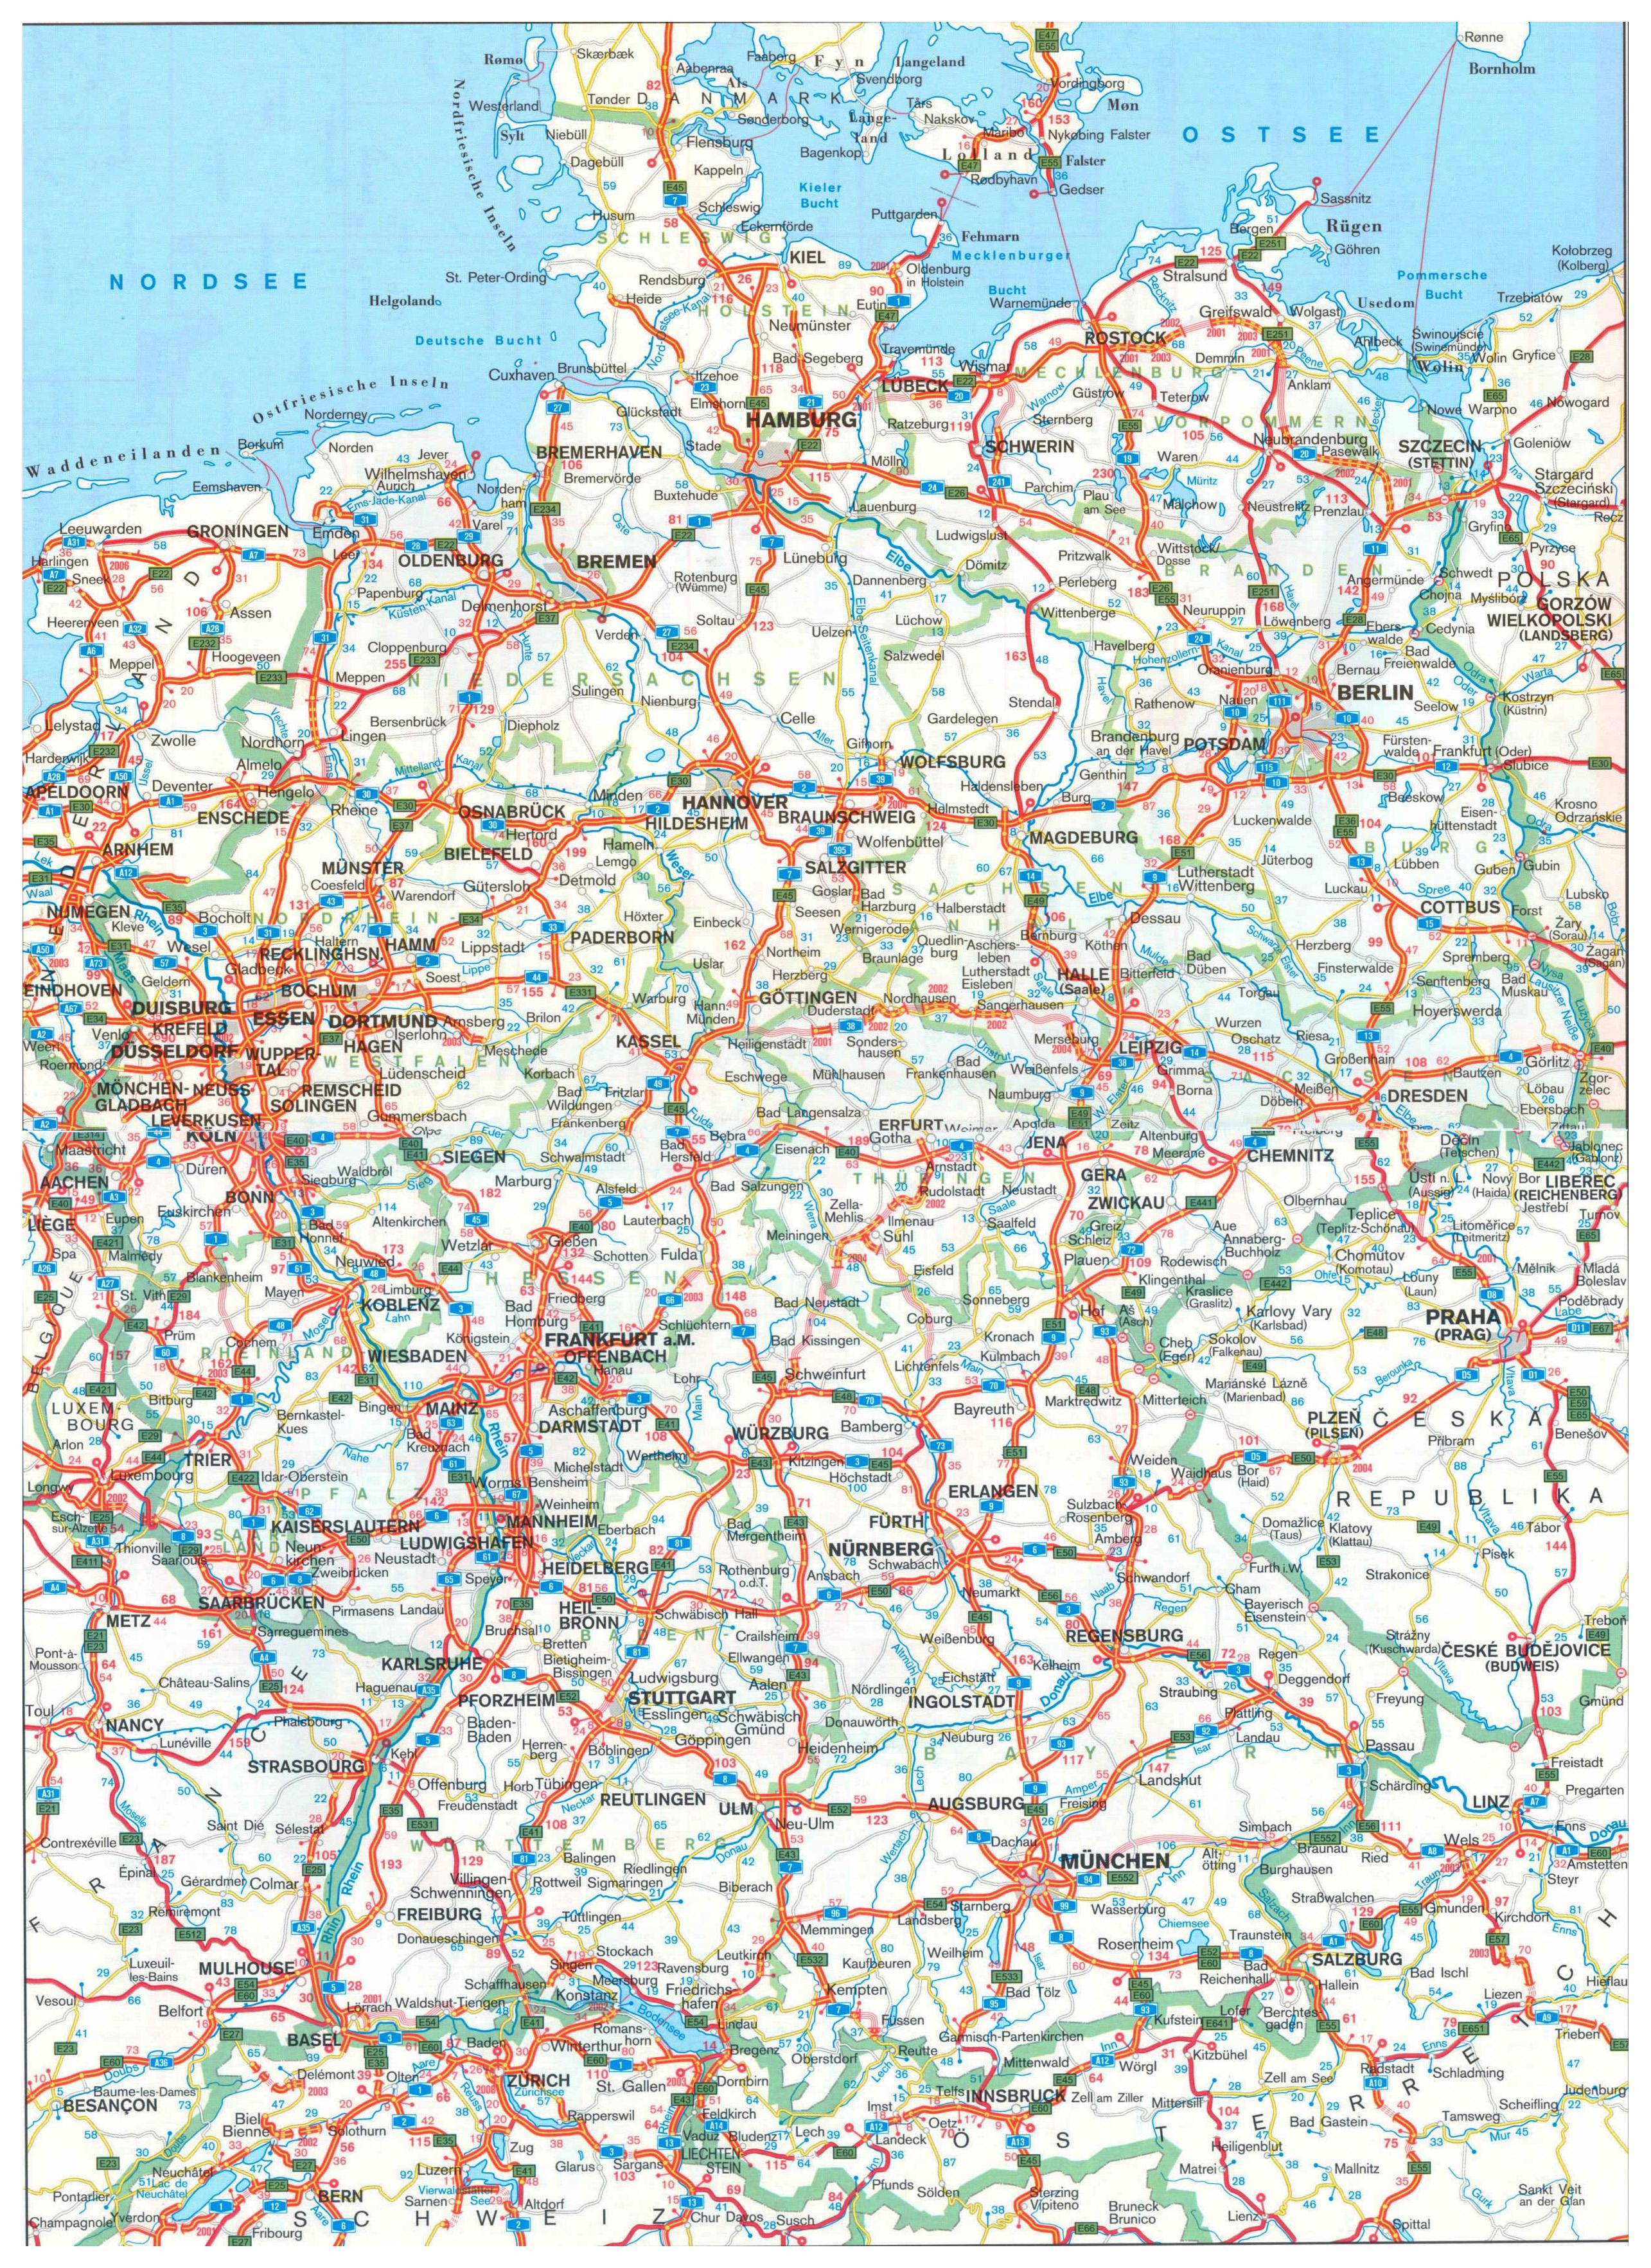 Road map of Germany: roads, tolls and highways of Germany